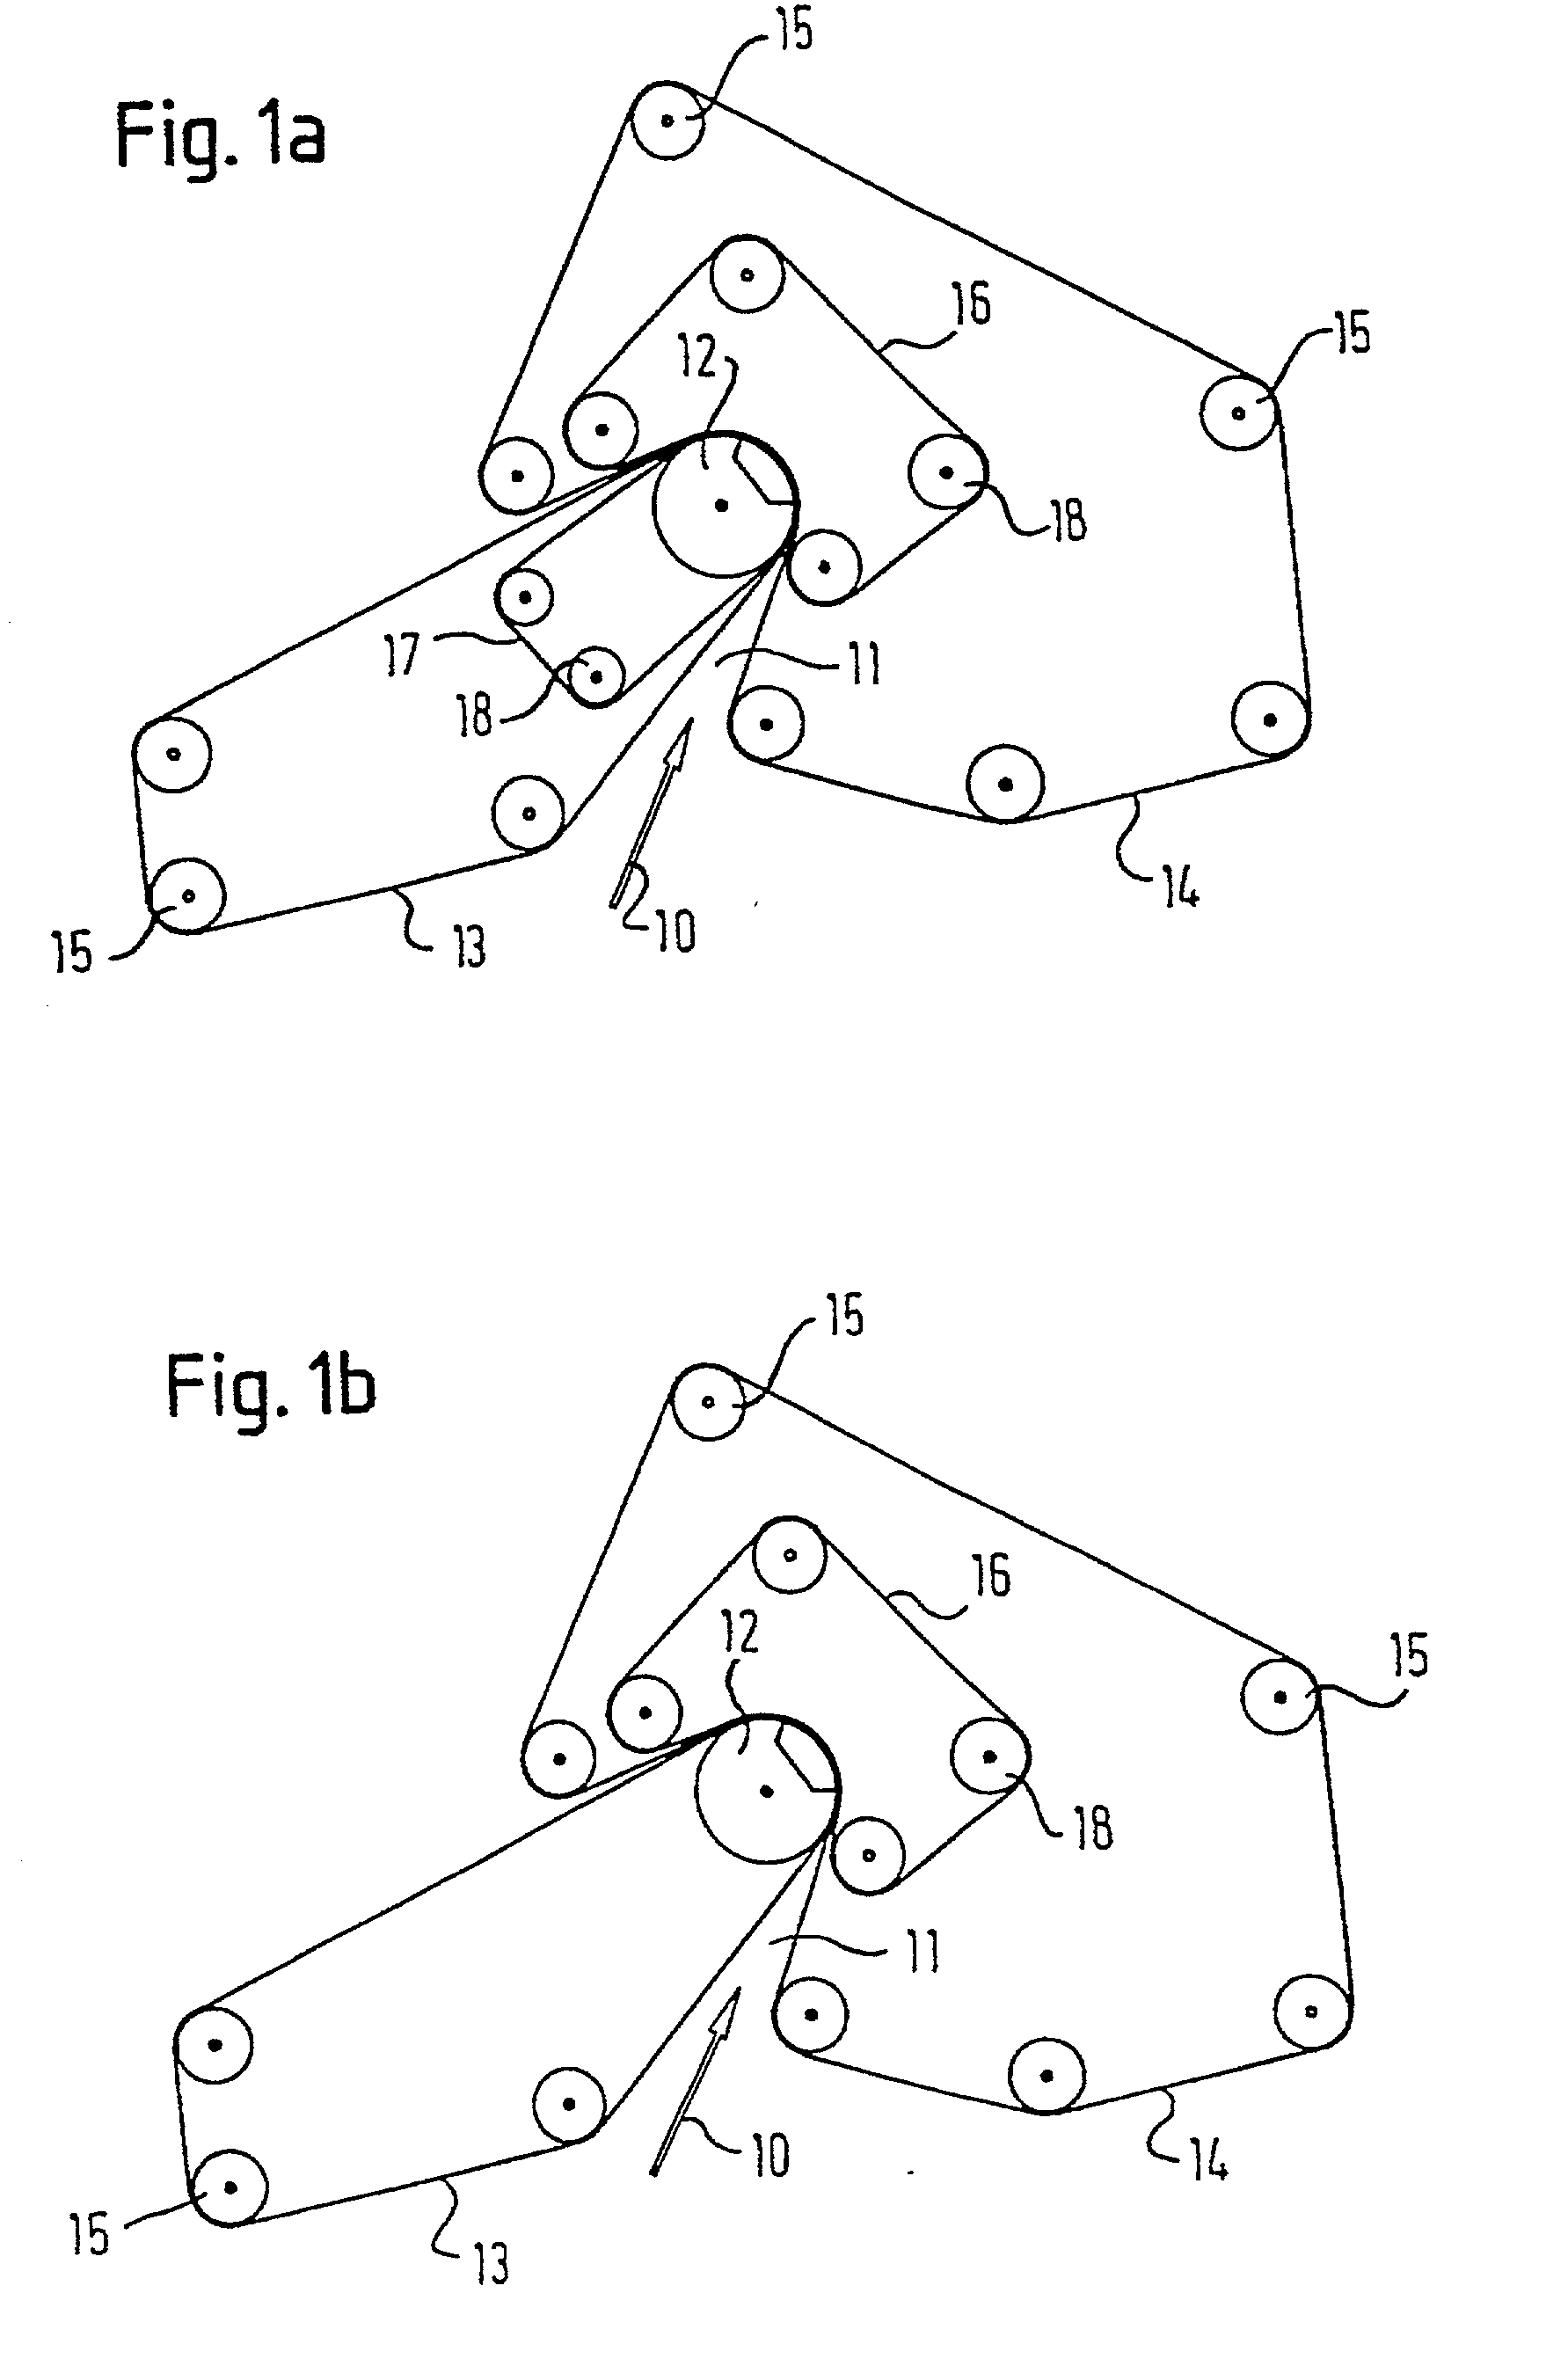 Tissue paper making machine, tissue paper produced therewith and method for producing such a tissue paper